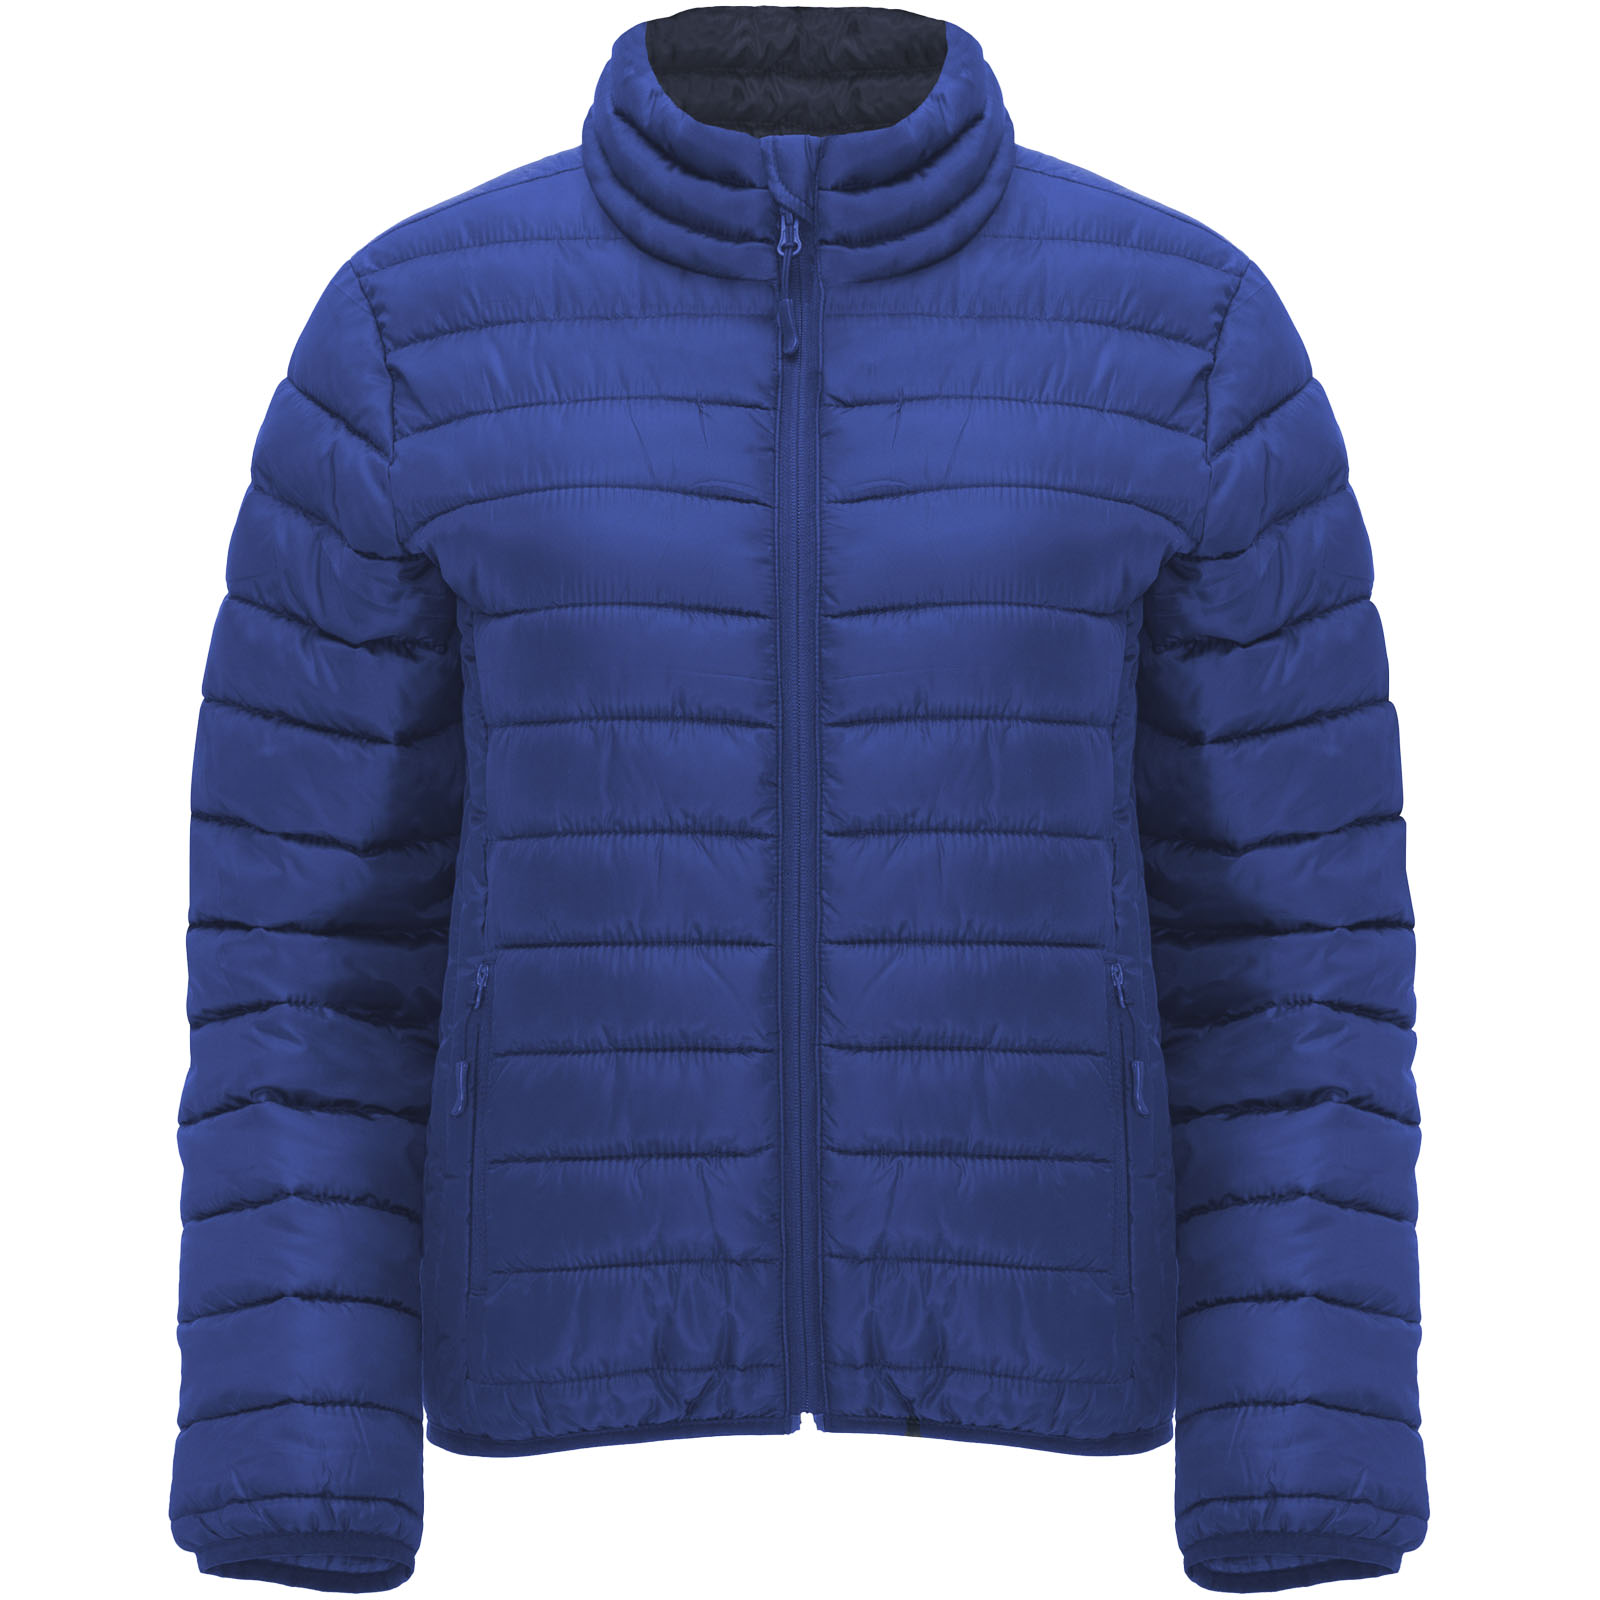 Advertising Jackets - Finland women's insulated jacket